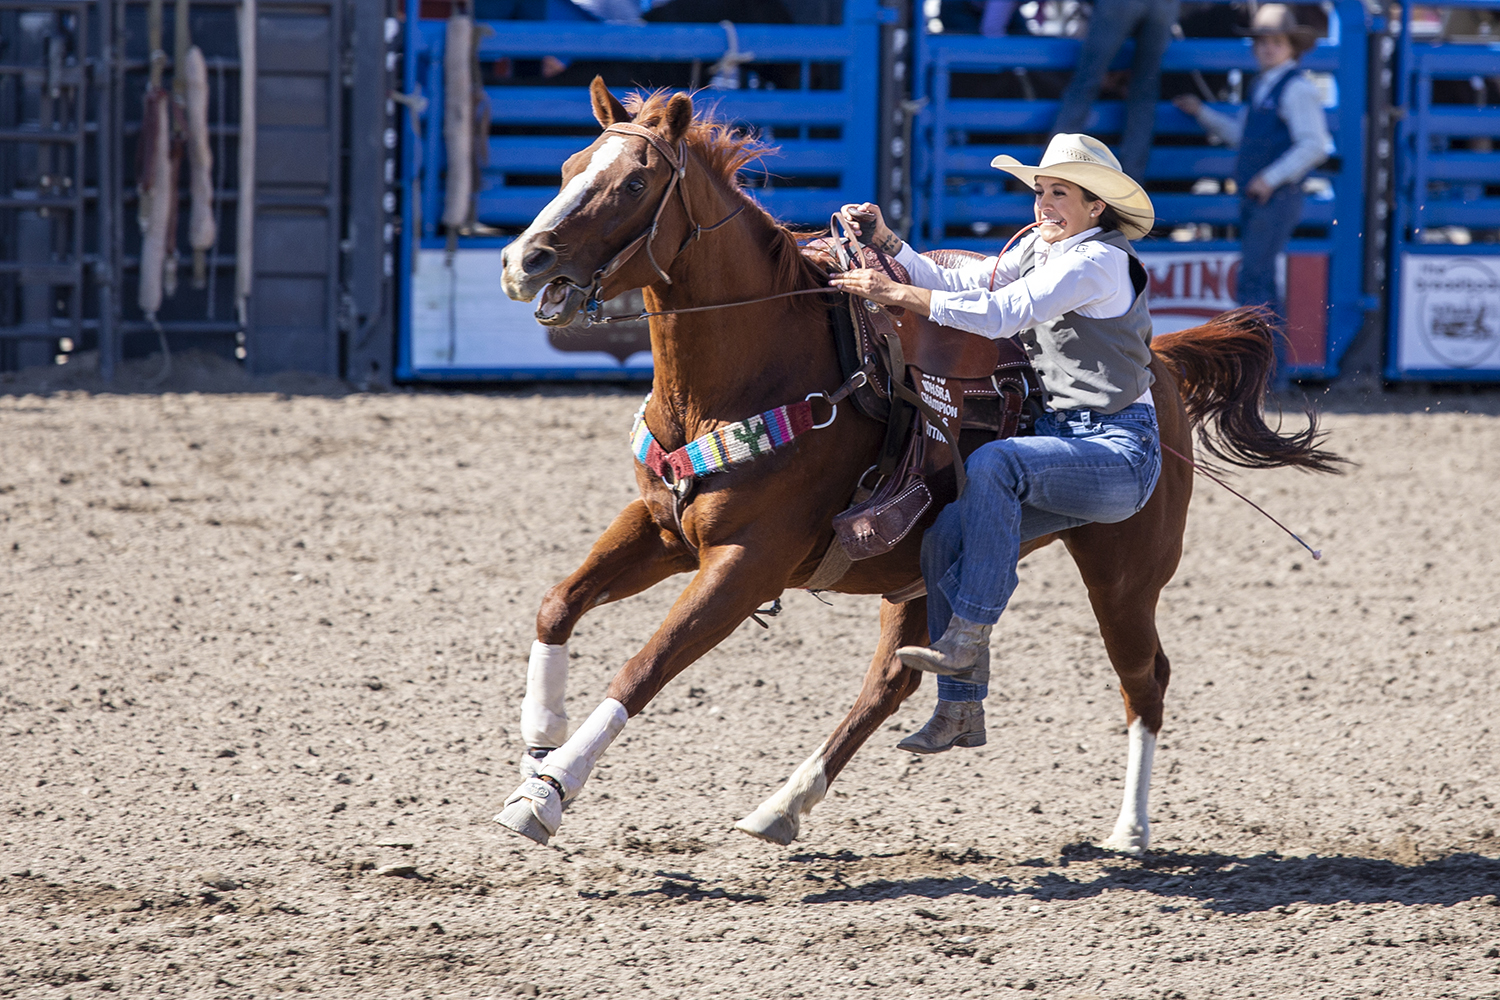 rodeo cowgirl dismounts from her running horse to rope a goat